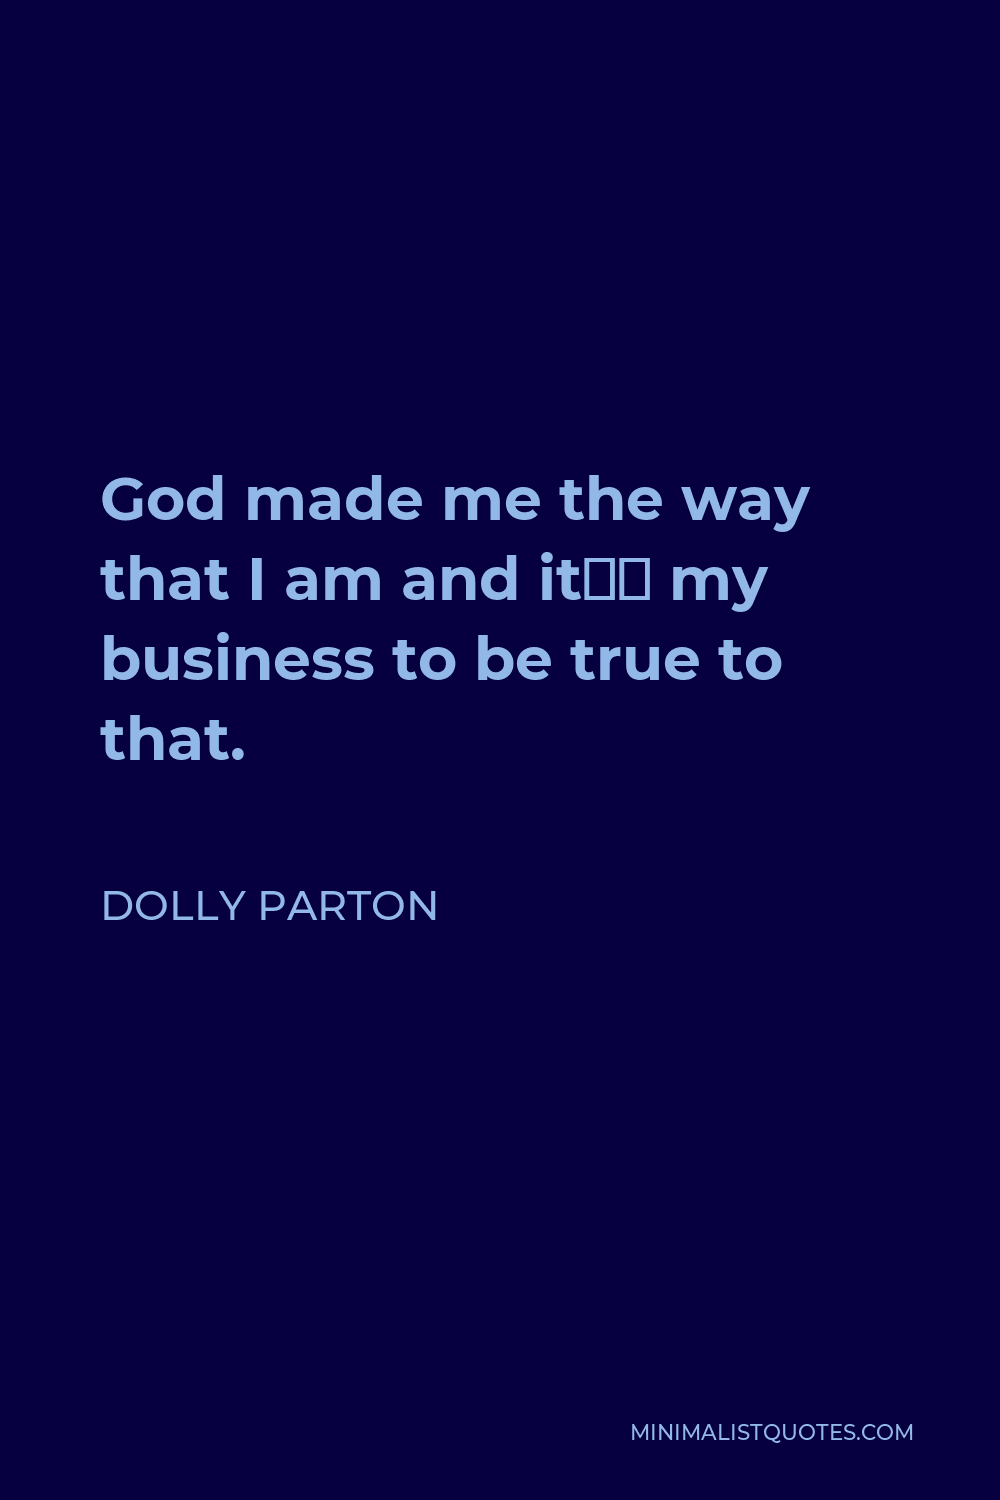 Dolly Parton Quote - God made me the way that I am and it’s my business to be true to that.